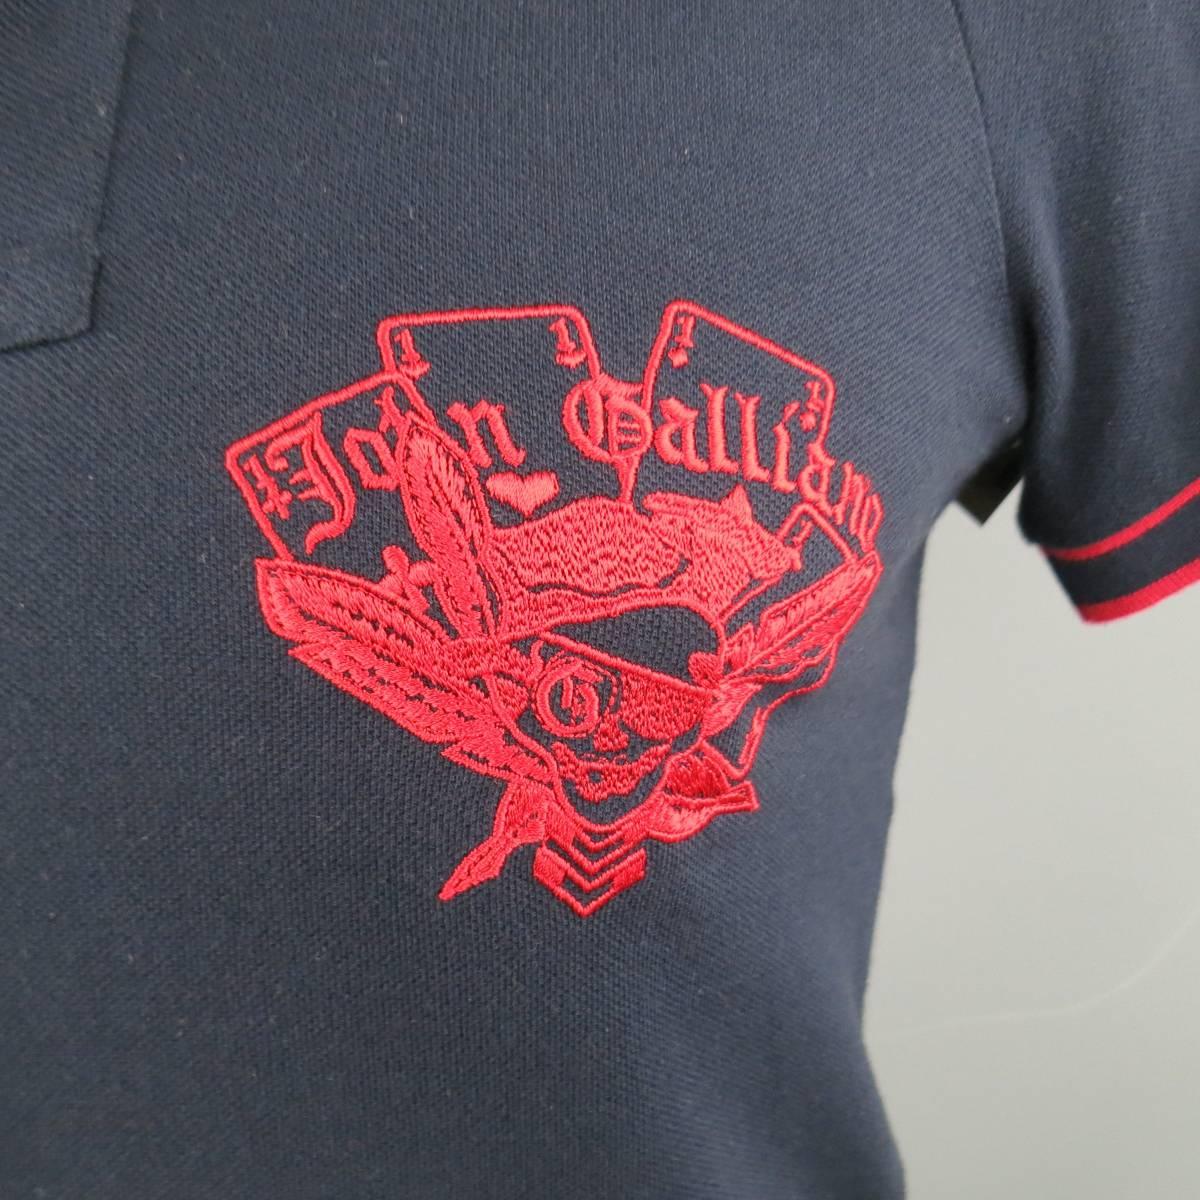 JOHN GALLIANO navy pique polo with red stripe around collar and arm bands featuring a red embroidered skull and playing cards logo and ruffled button front. Made in Italy.
 
Excellent Pre-Owned Condition.
Marked: S
 
Measurements
Shoulder: 19